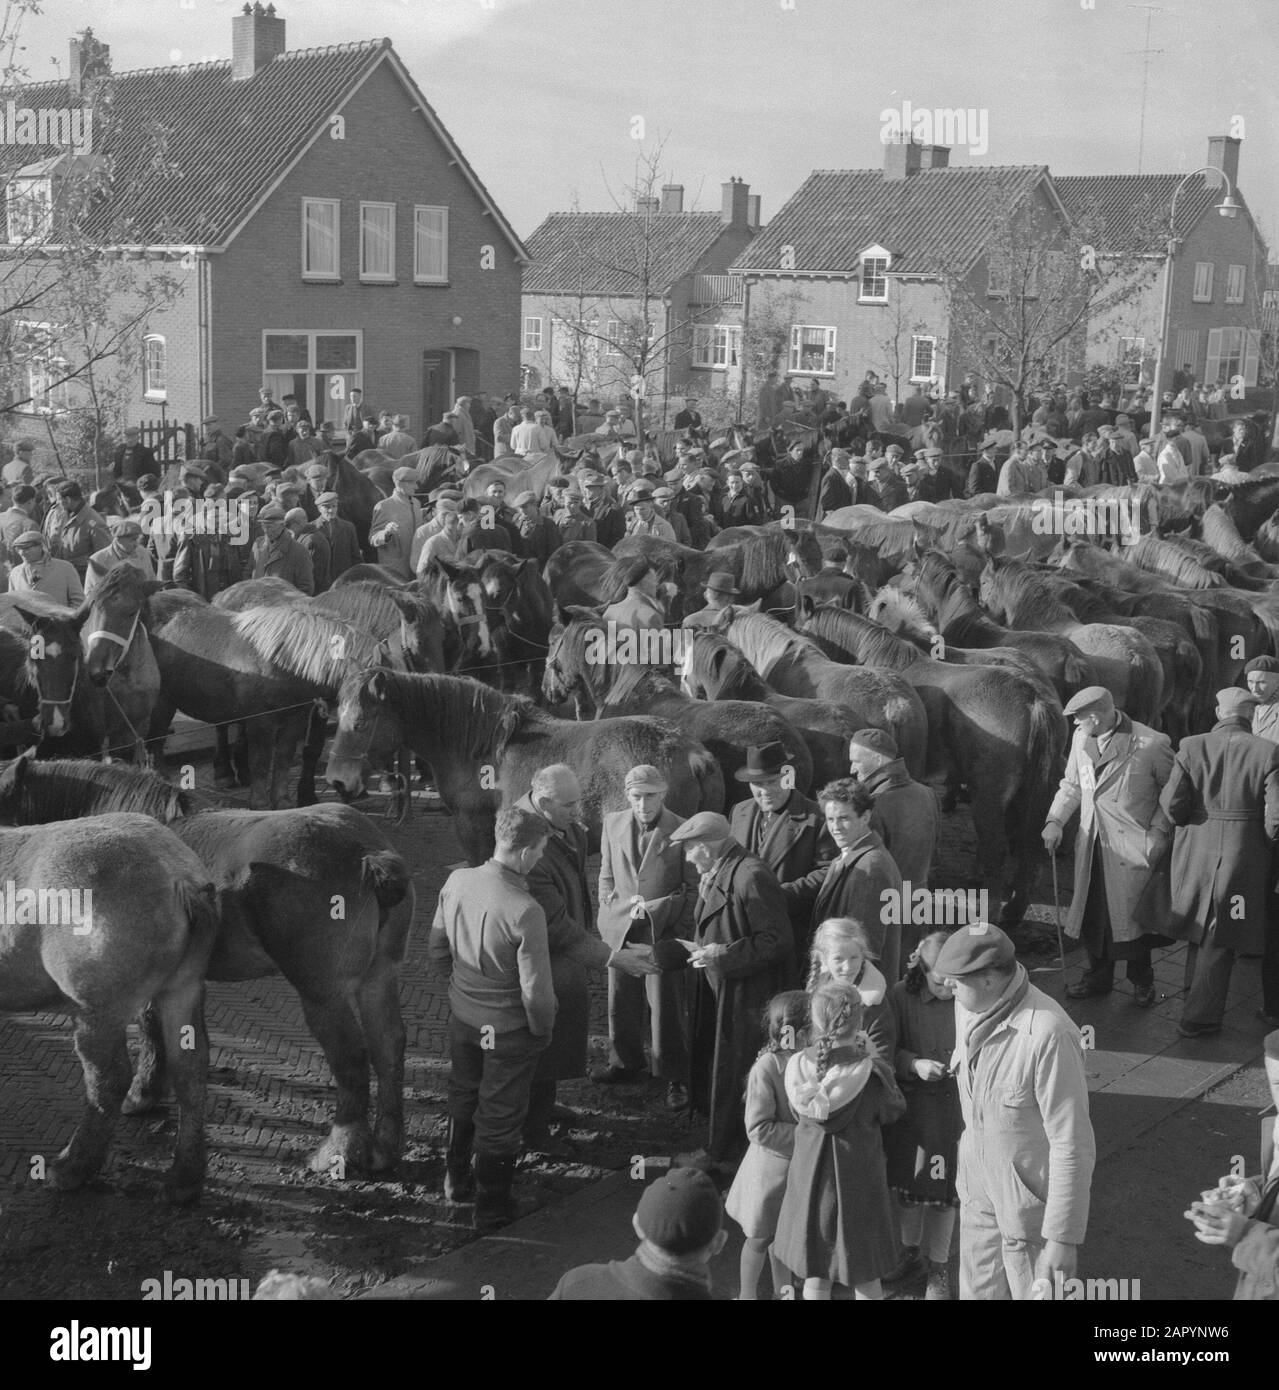 Annual horse market at Hedel Date: November 7, 1960 Location: Hedel Keywords: horse markets Stock Photo